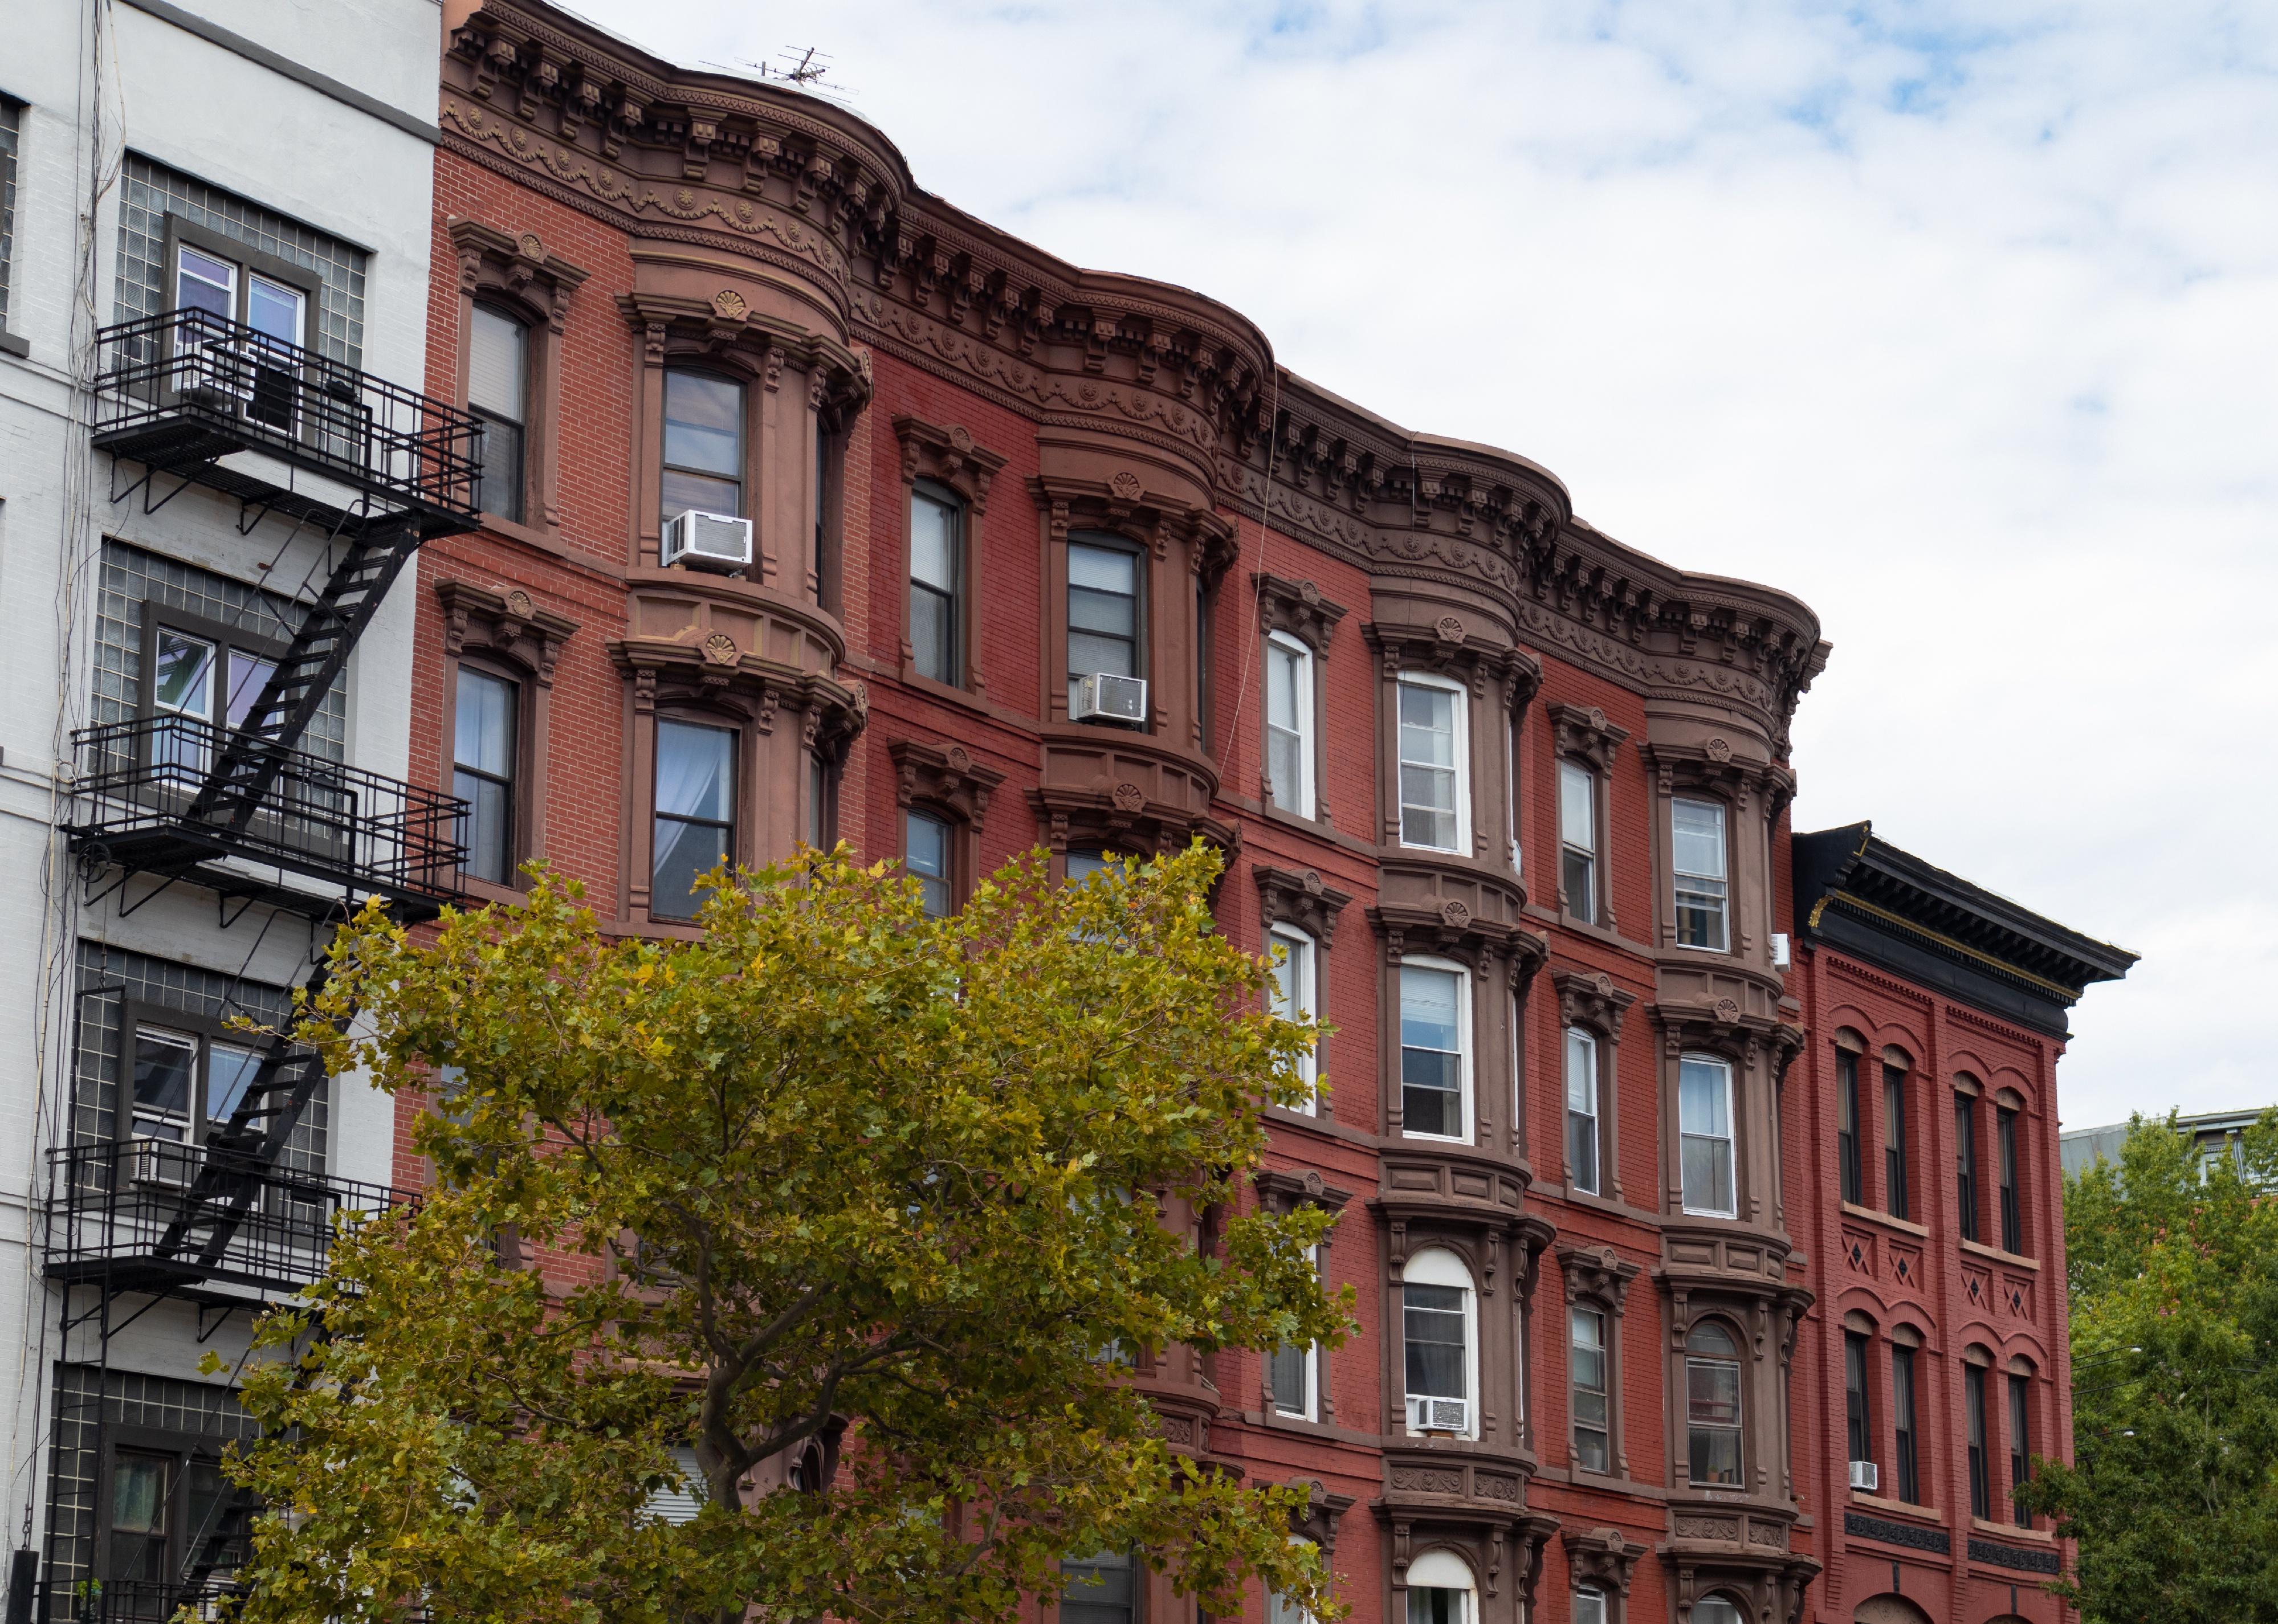 Row of colorful old brownstone buildings in Hoboken, New Jersey